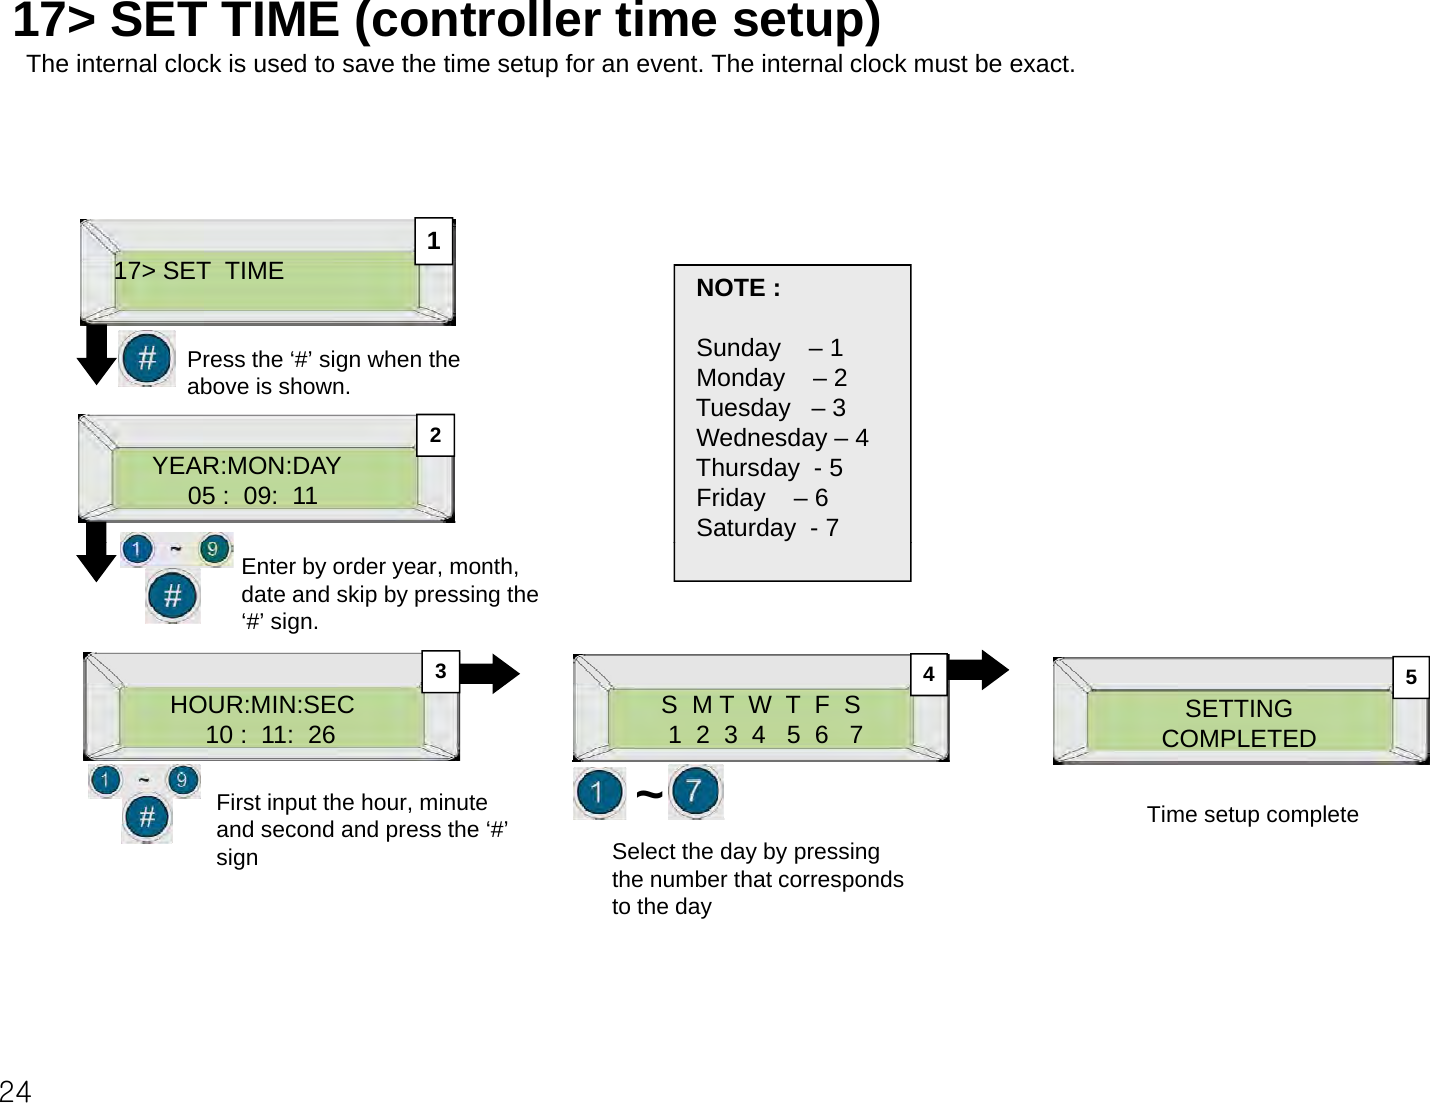 17&gt; SET TIME (controller time setup)The internal clock is used to save the time setup for an event. The internal clock must be exact.S117&gt; SET  TIME NOTE :Sunday    – 1Monday    – 2Td3Press the ‘#’ sign when the above is shown.YEAR:MON:DAY05 :  09:  11Tuesday   –3Wednesday – 4Thursday  - 5 Friday    – 6Saturday  - 7245Enter by order year, month, date and skip by pressing the ‘#’ sign.3HOUR:MIN:SEC10 :  11:  26 S  M T  W  T  F  S1  2  3  4   5  6   7 SETTINGCOMPLETED5First input the hour, minute dddth‘#’~Time setup completeand second and press the ‘#’ sign Select the day by pressing the number that corresponds to the daypp24